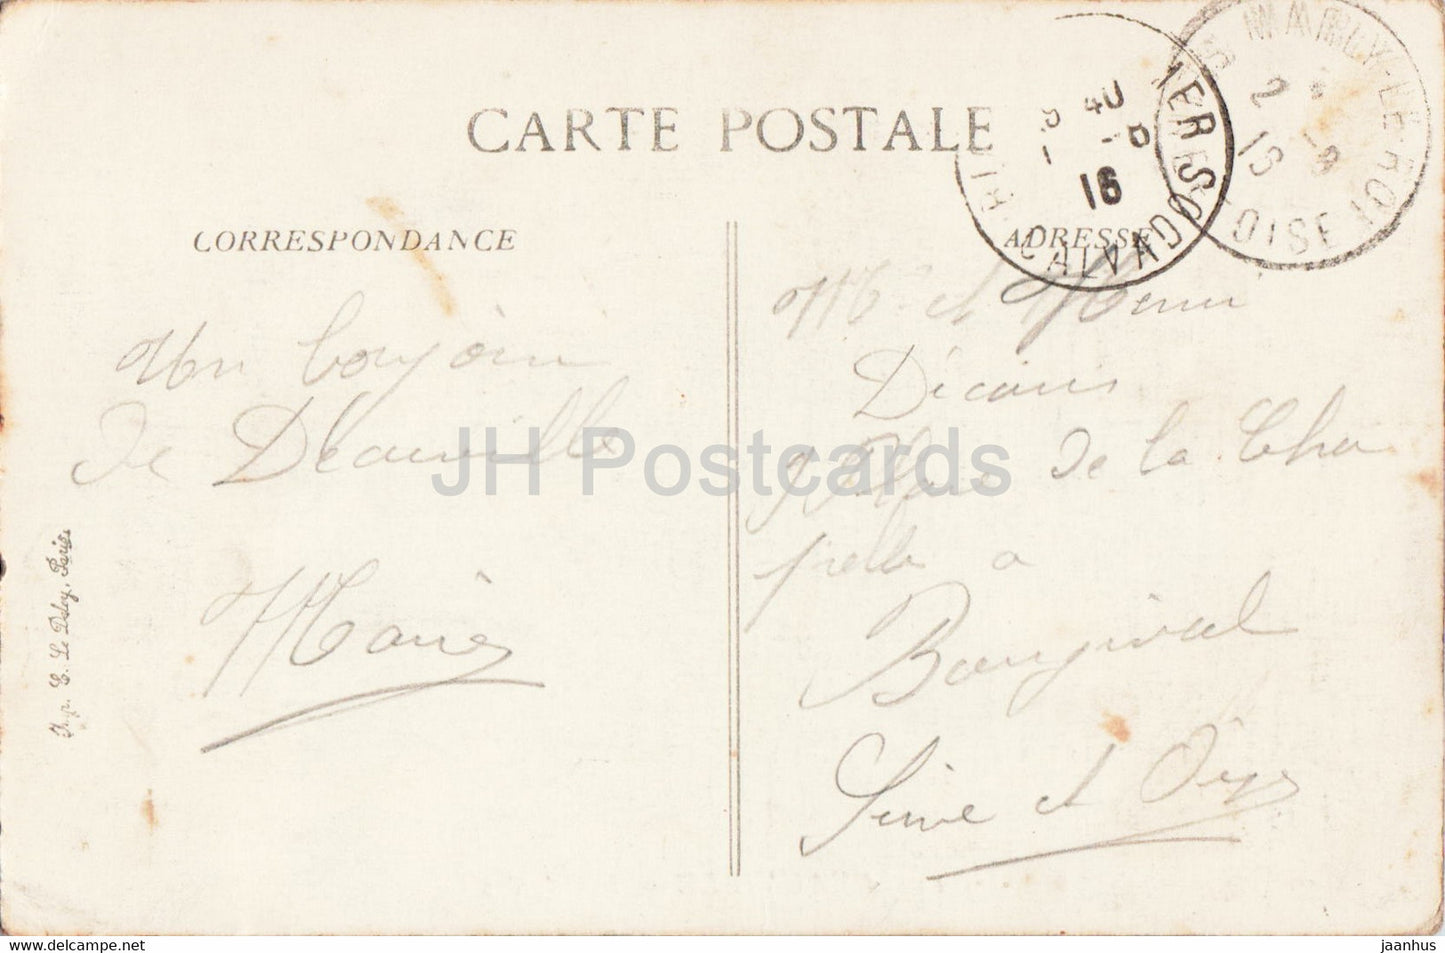 Deauville - Les Jetees - 11 - sailing boat - bicycle - old postcard - 1916 - France - used